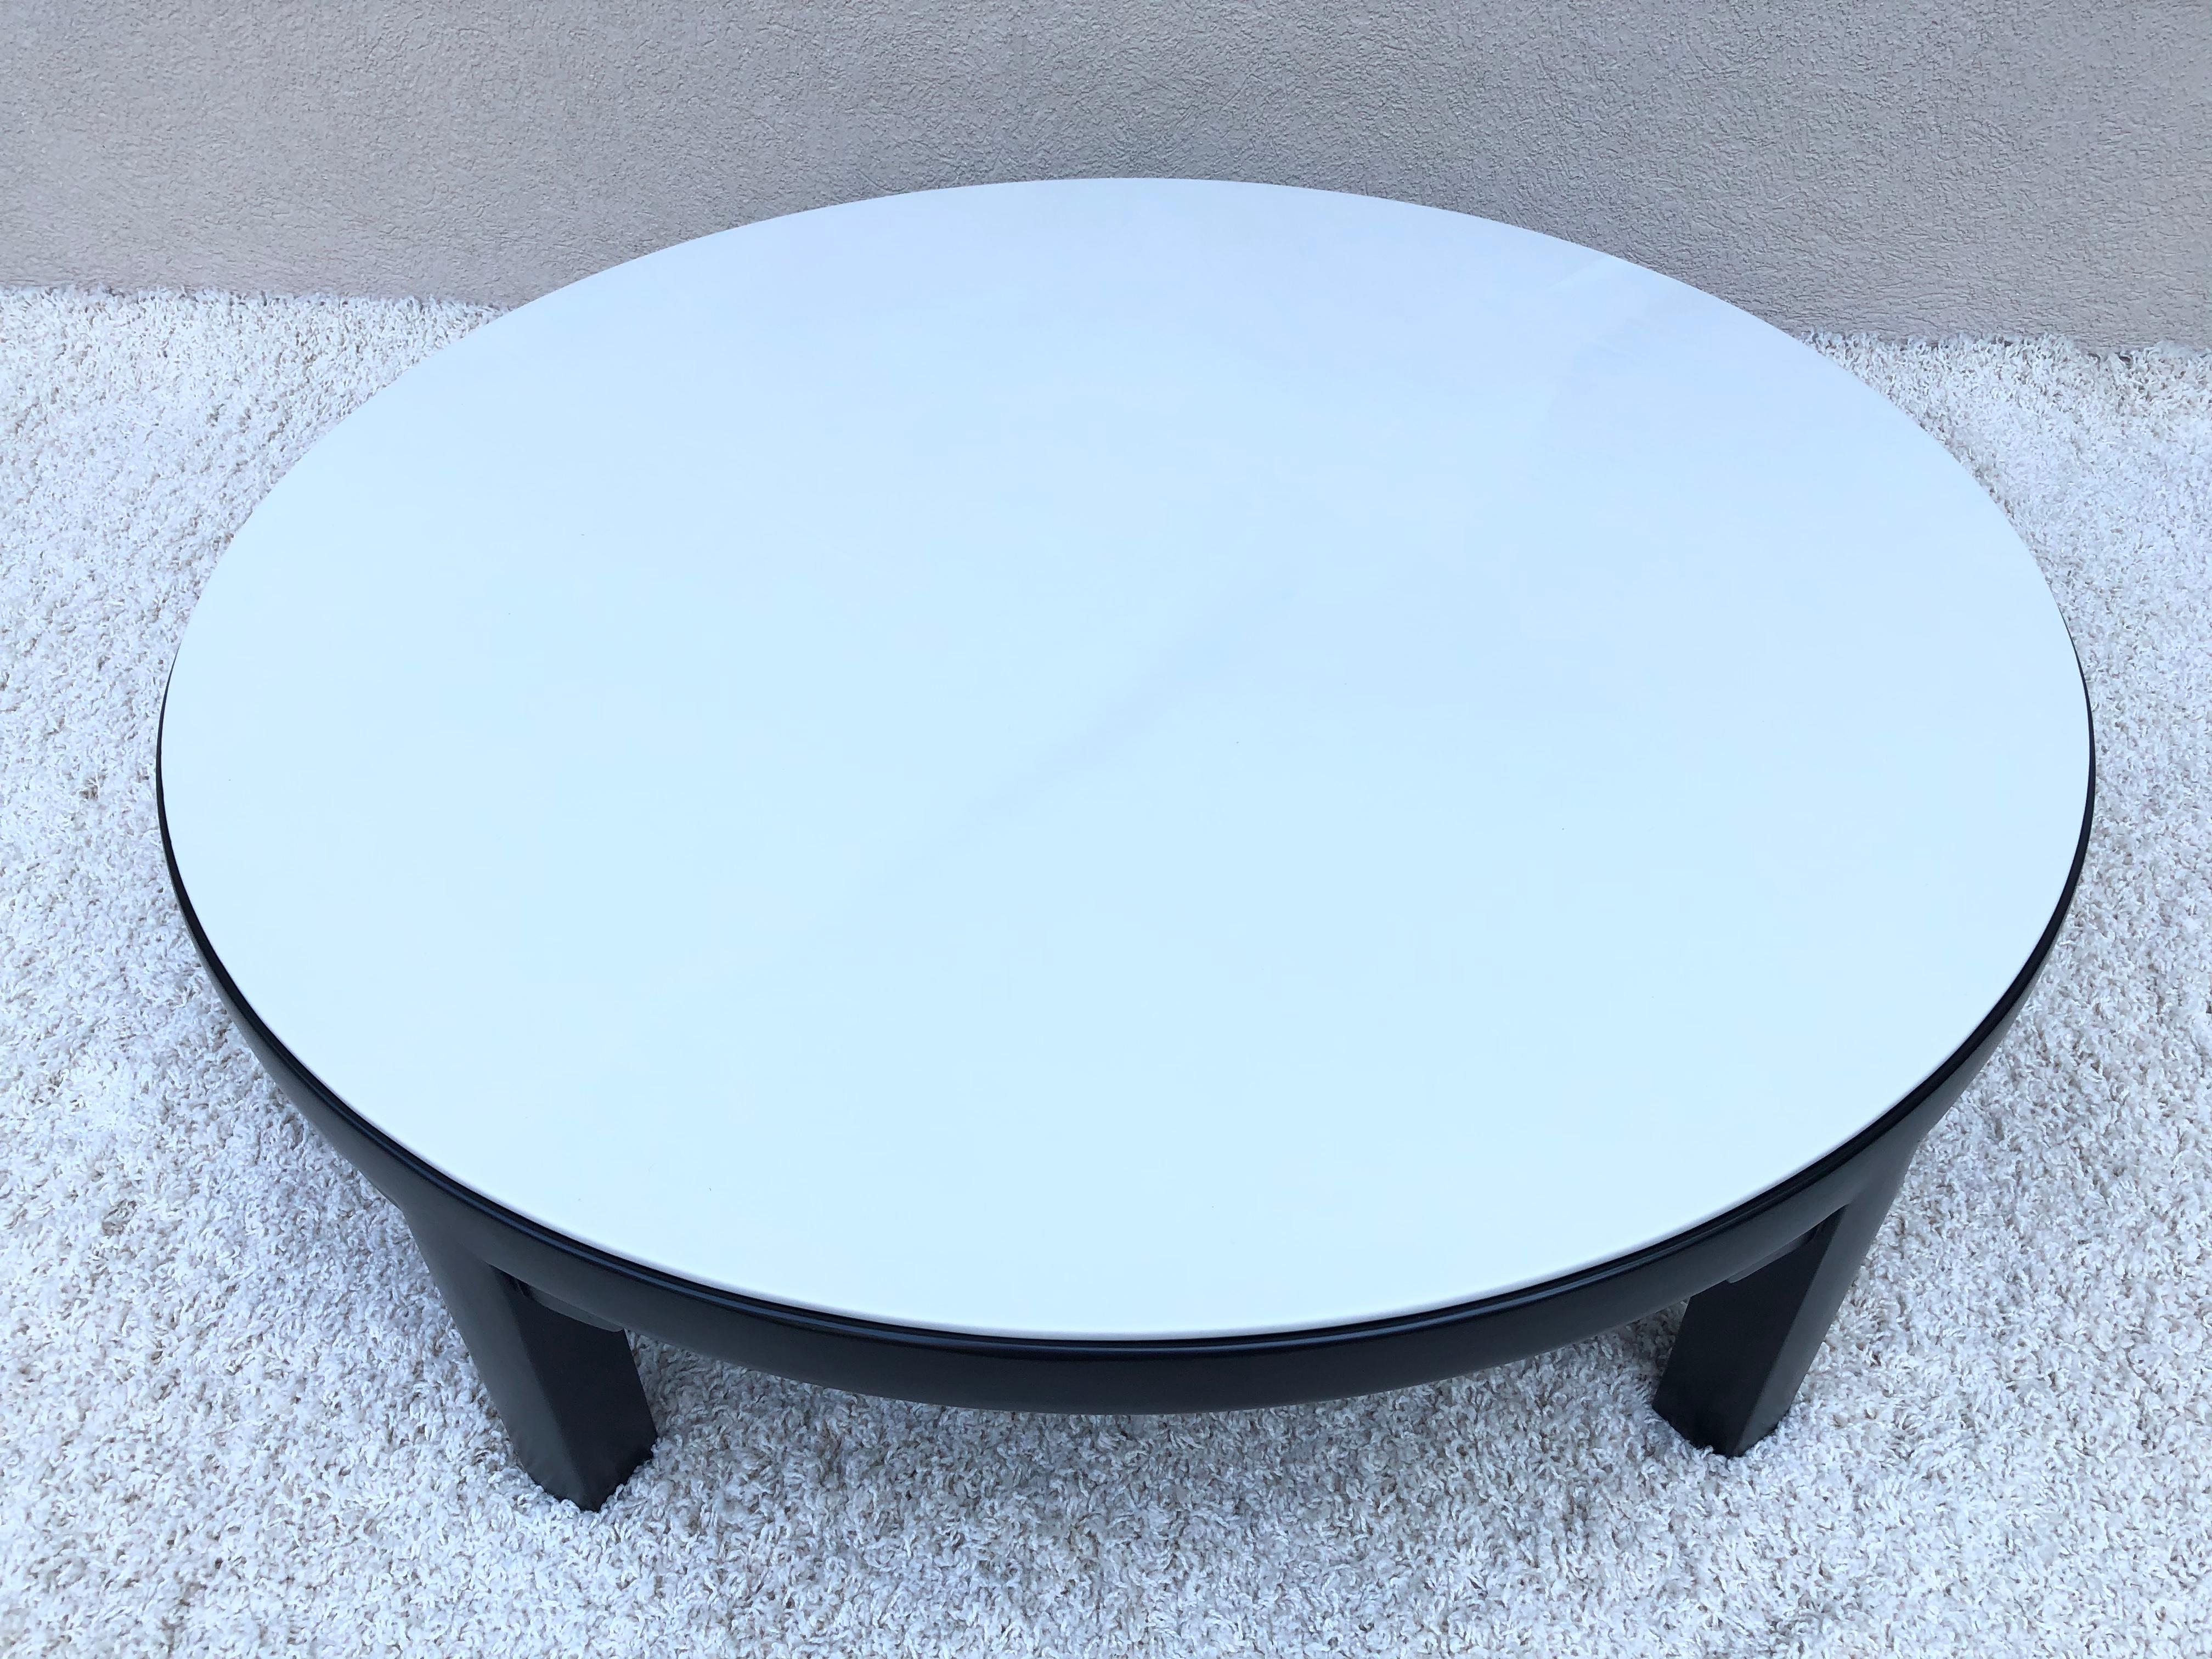 Edward Wormley Dubar off White Leather Top Dark Walnut Cocktail Table In Good Condition For Sale In Westport, CT